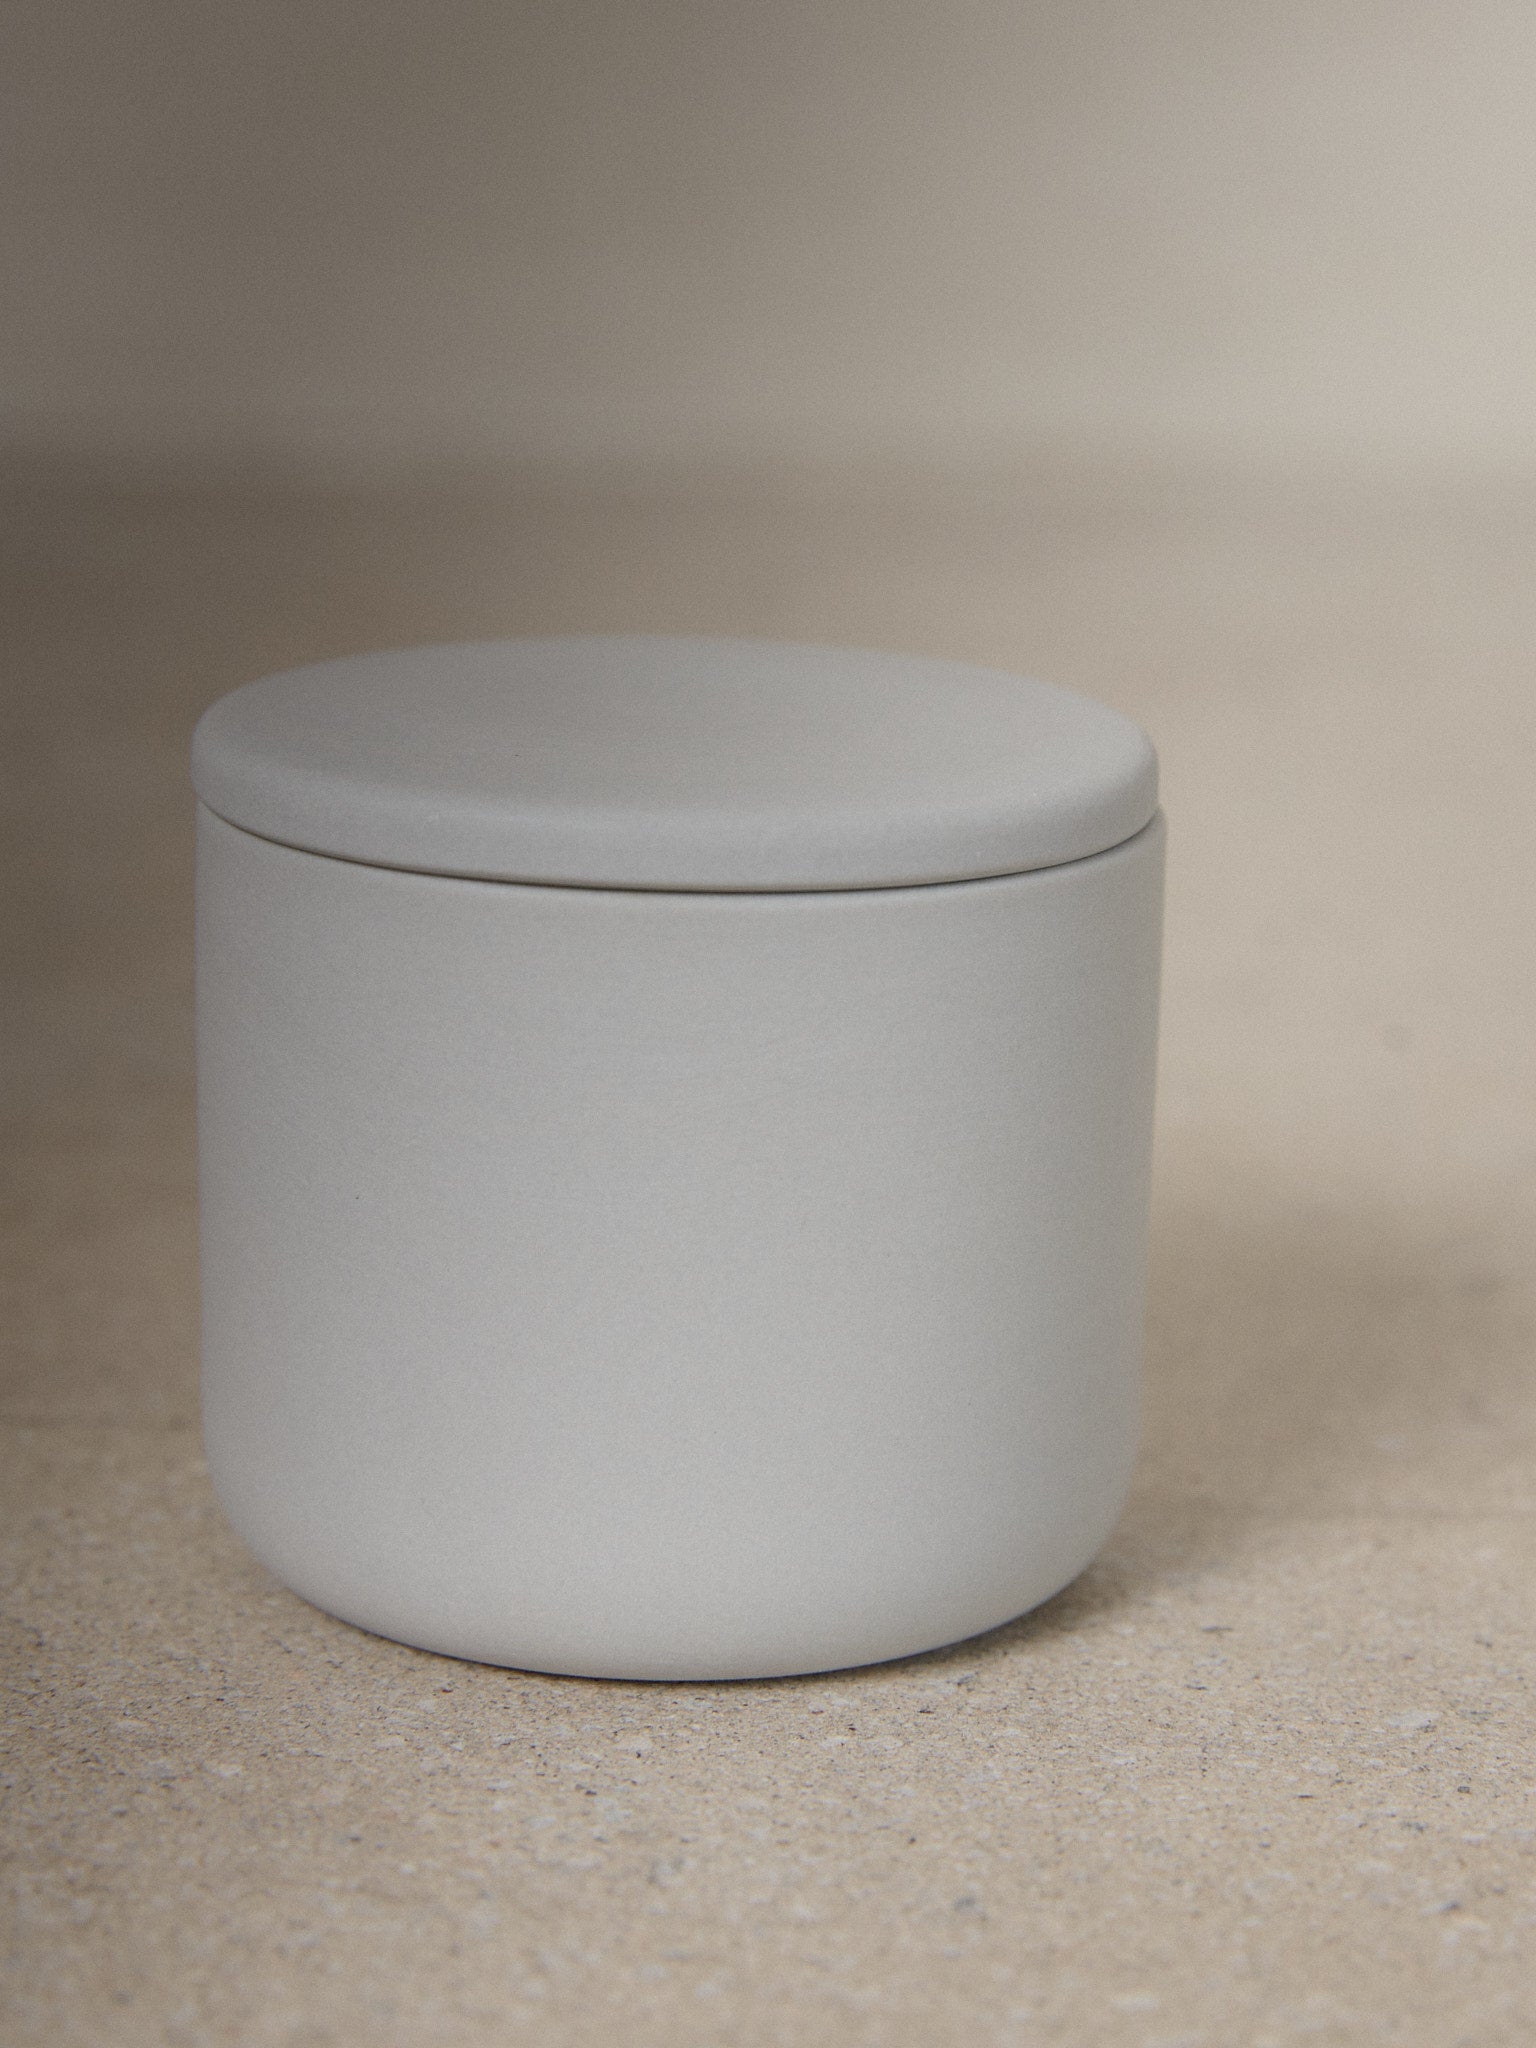 Round Cose Box. A study in refined simplicity, the Round Cose Box by Bertrand Lejoly for Serax adds subtle luxury to any bathroom or kitchen. 